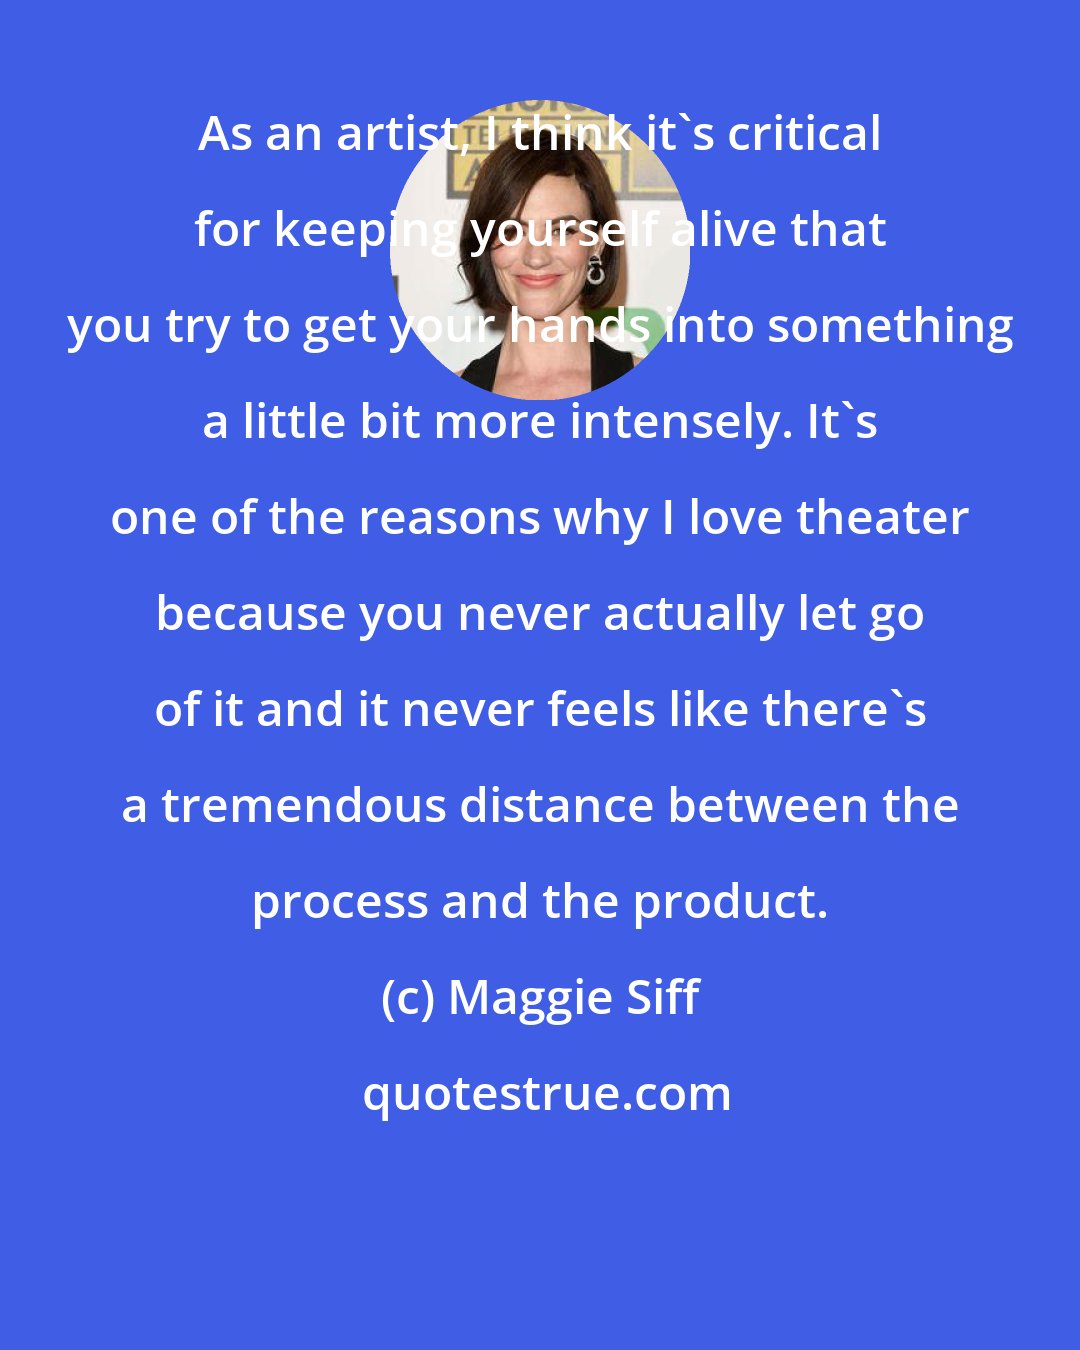 Maggie Siff: As an artist, I think it's critical for keeping yourself alive that you try to get your hands into something a little bit more intensely. It's one of the reasons why I love theater because you never actually let go of it and it never feels like there's a tremendous distance between the process and the product.